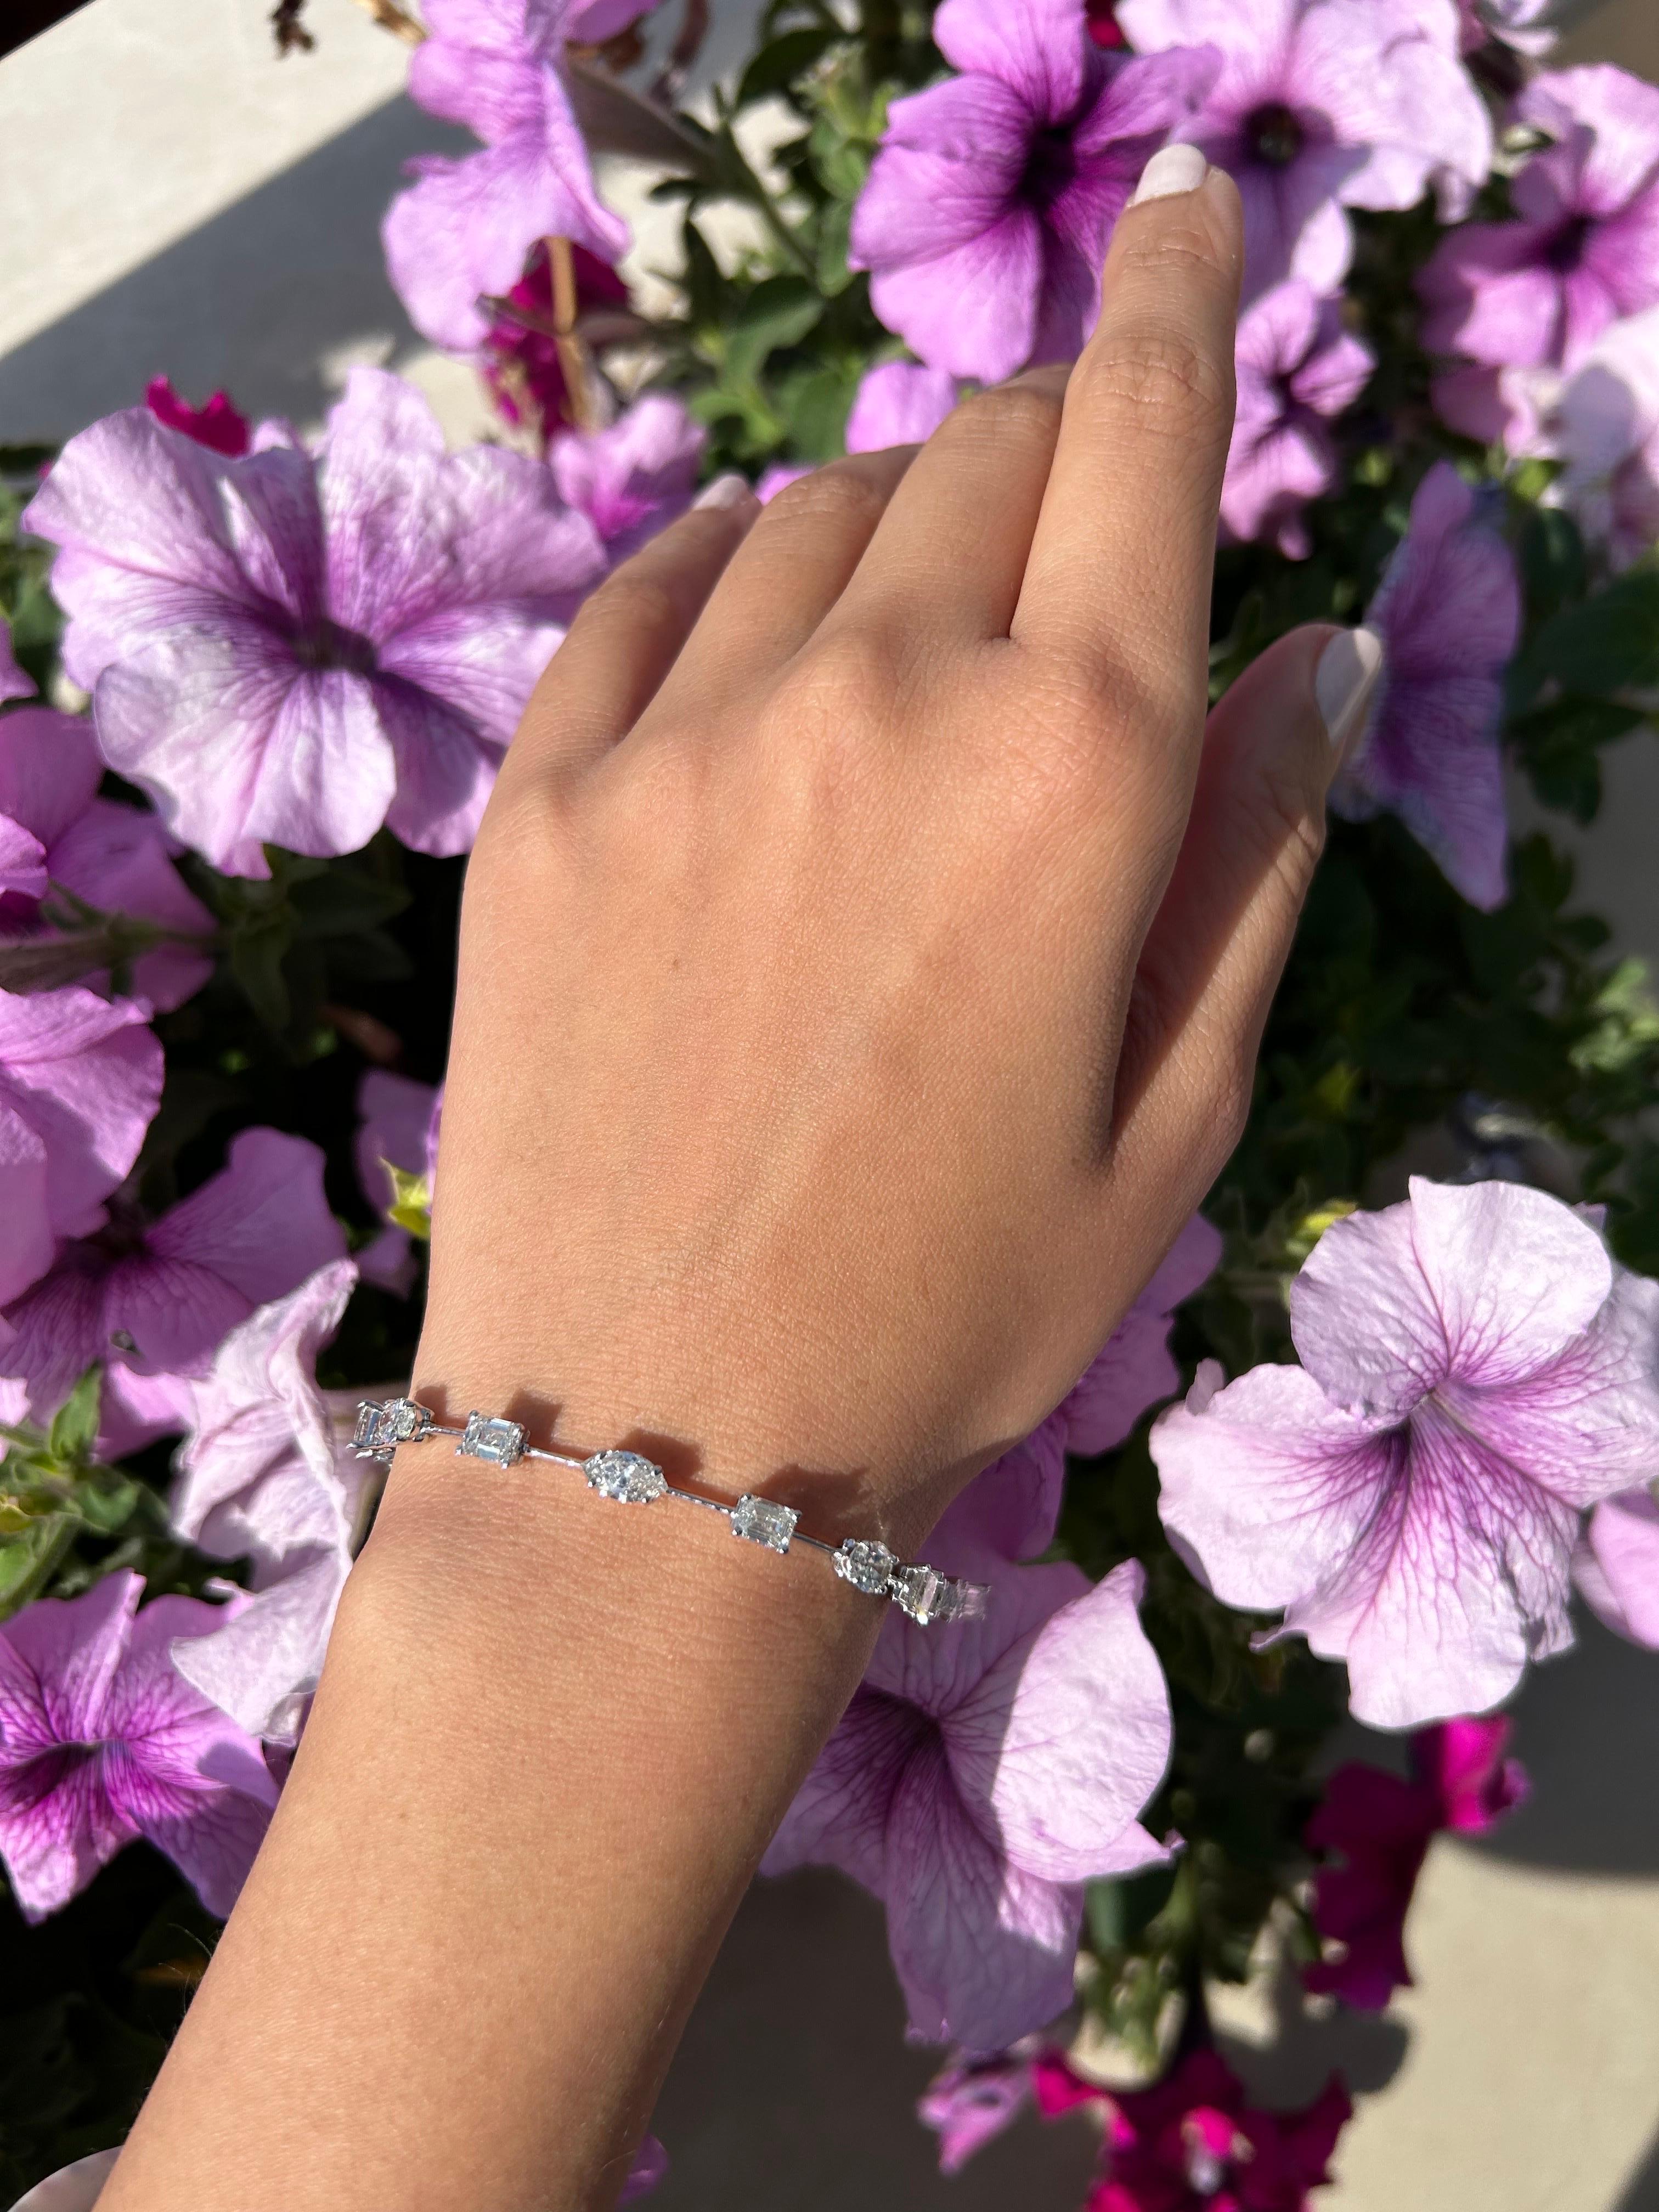 A twist to a classic tennis bracelet, with mixed shape White Diamonds weighing 0.5 carats each. There are a total of 13 VS quality, G/H color White Diamonds, set in 18K White Gold. The length of the bracelet is currently 6 inches, can be